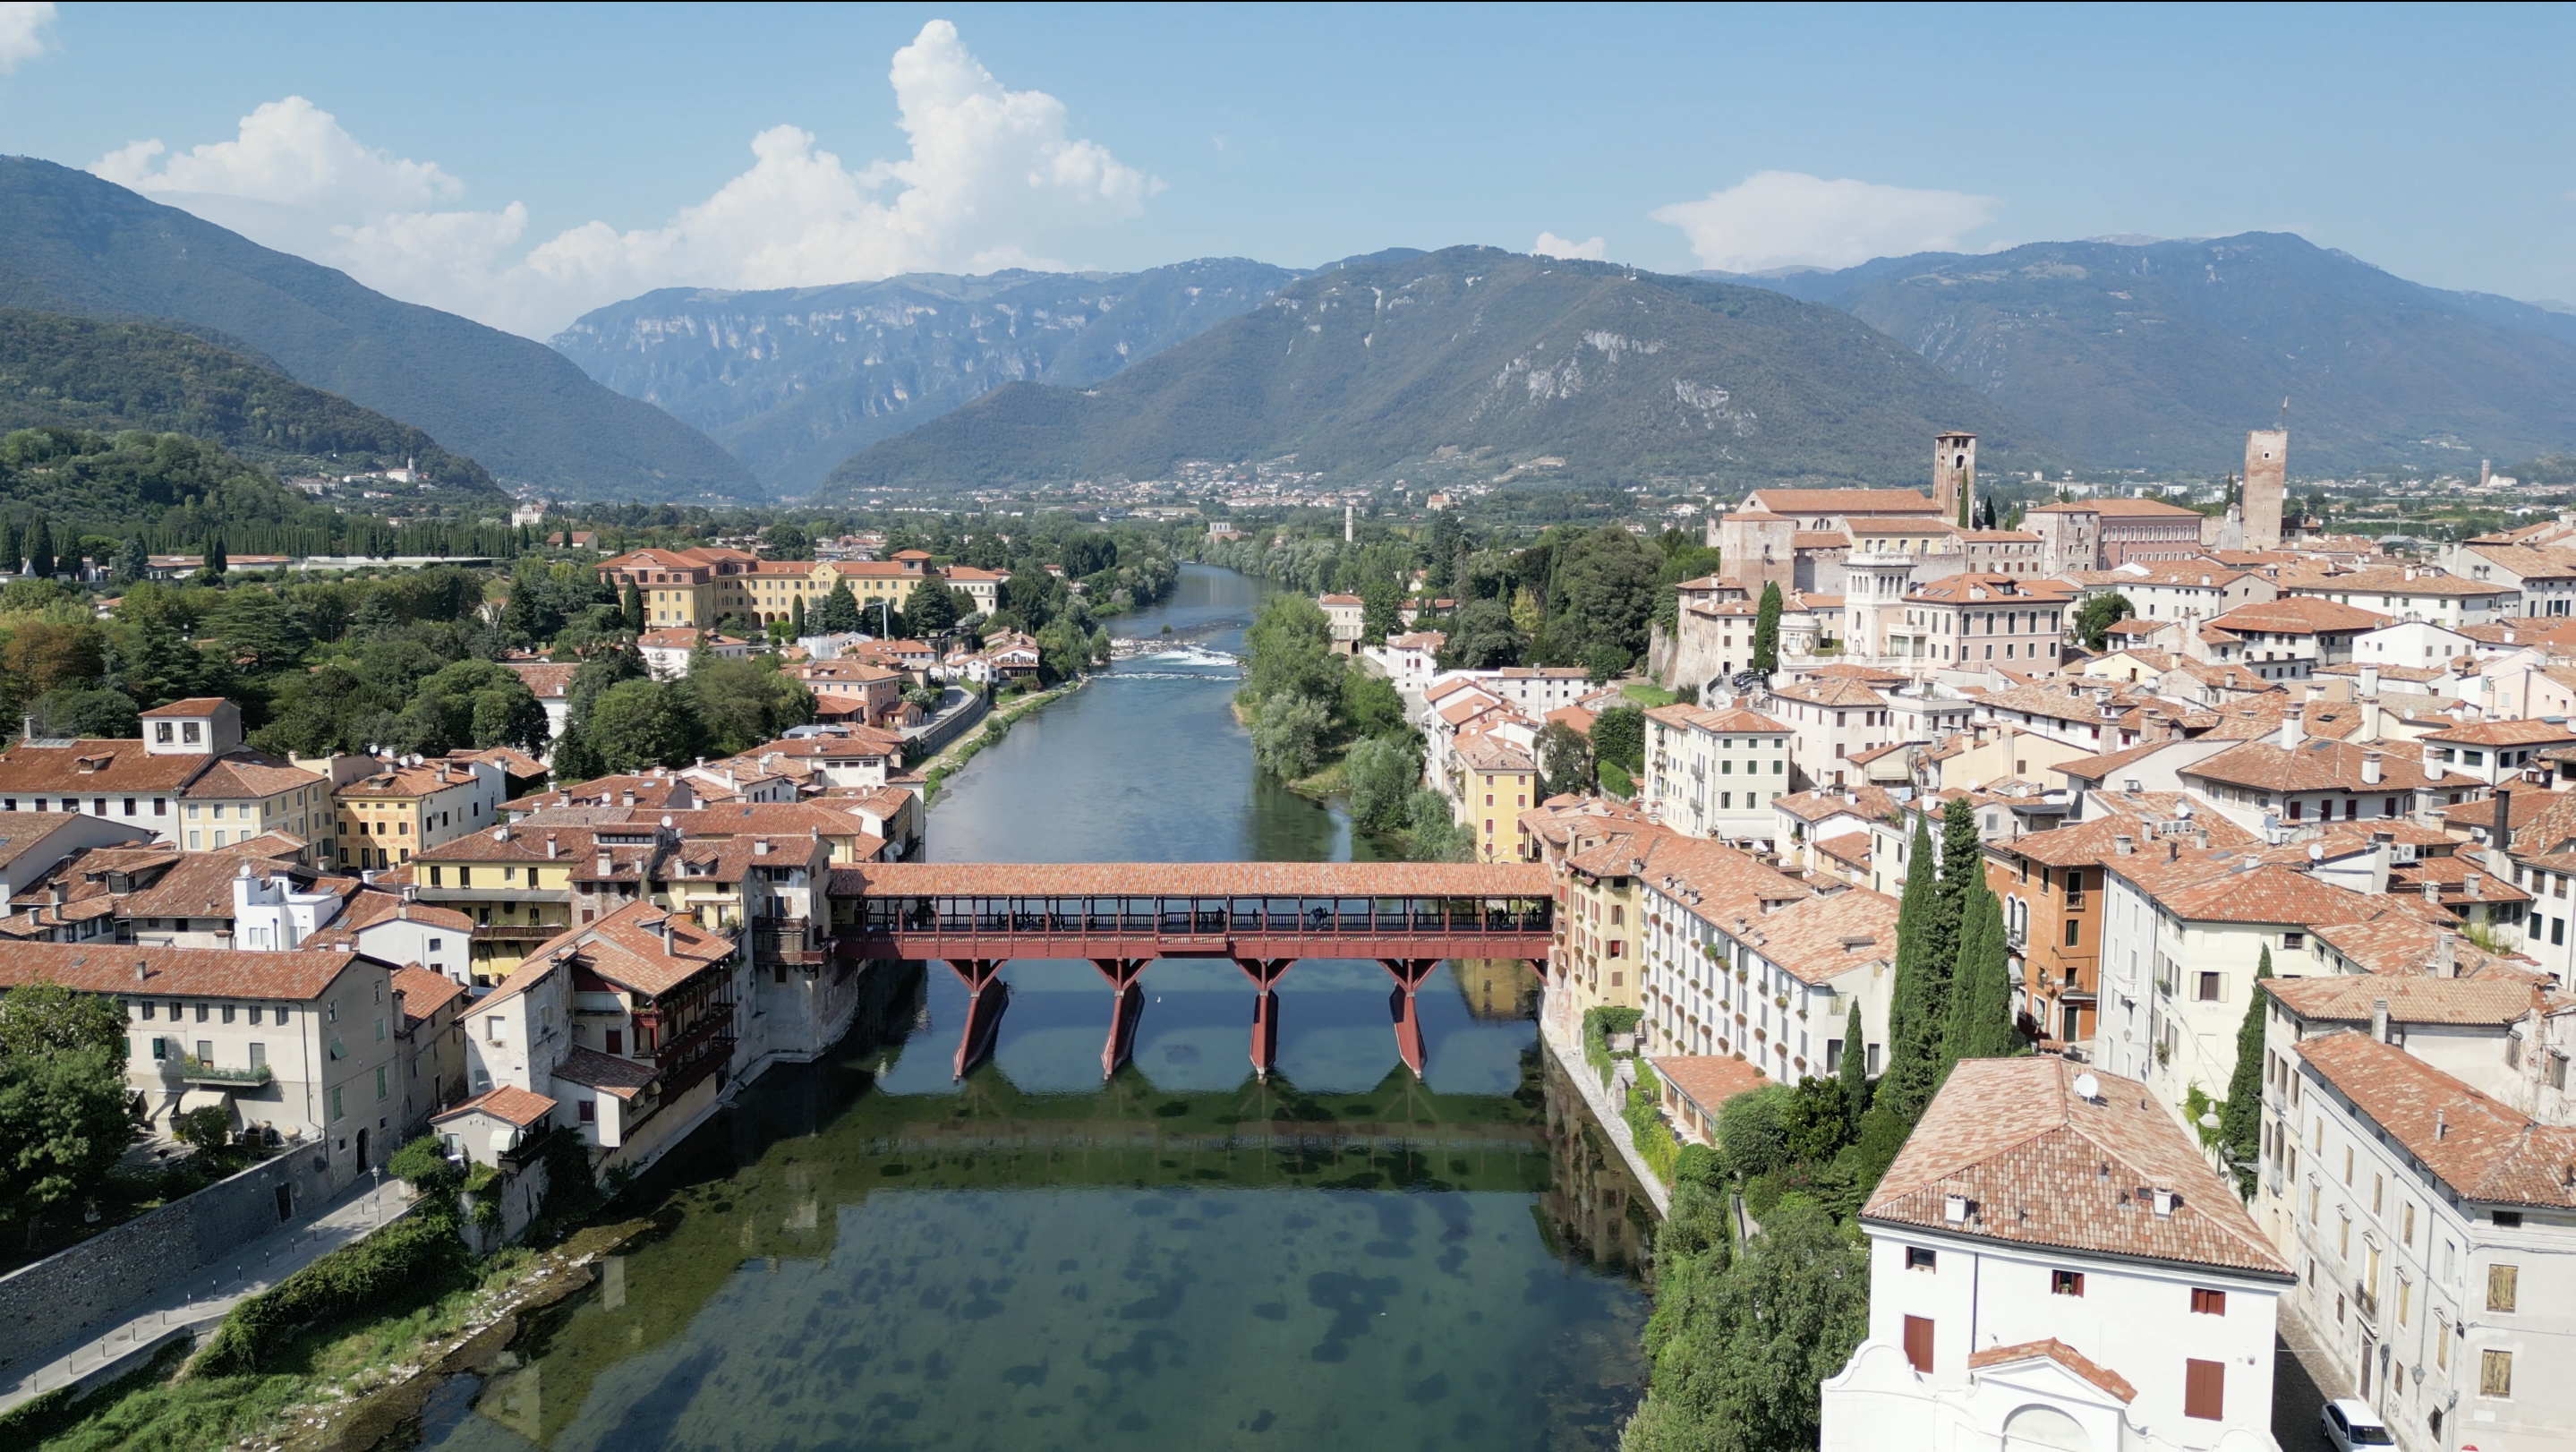 8 must see-places and activities to do in Bassano del Grappa, Italy